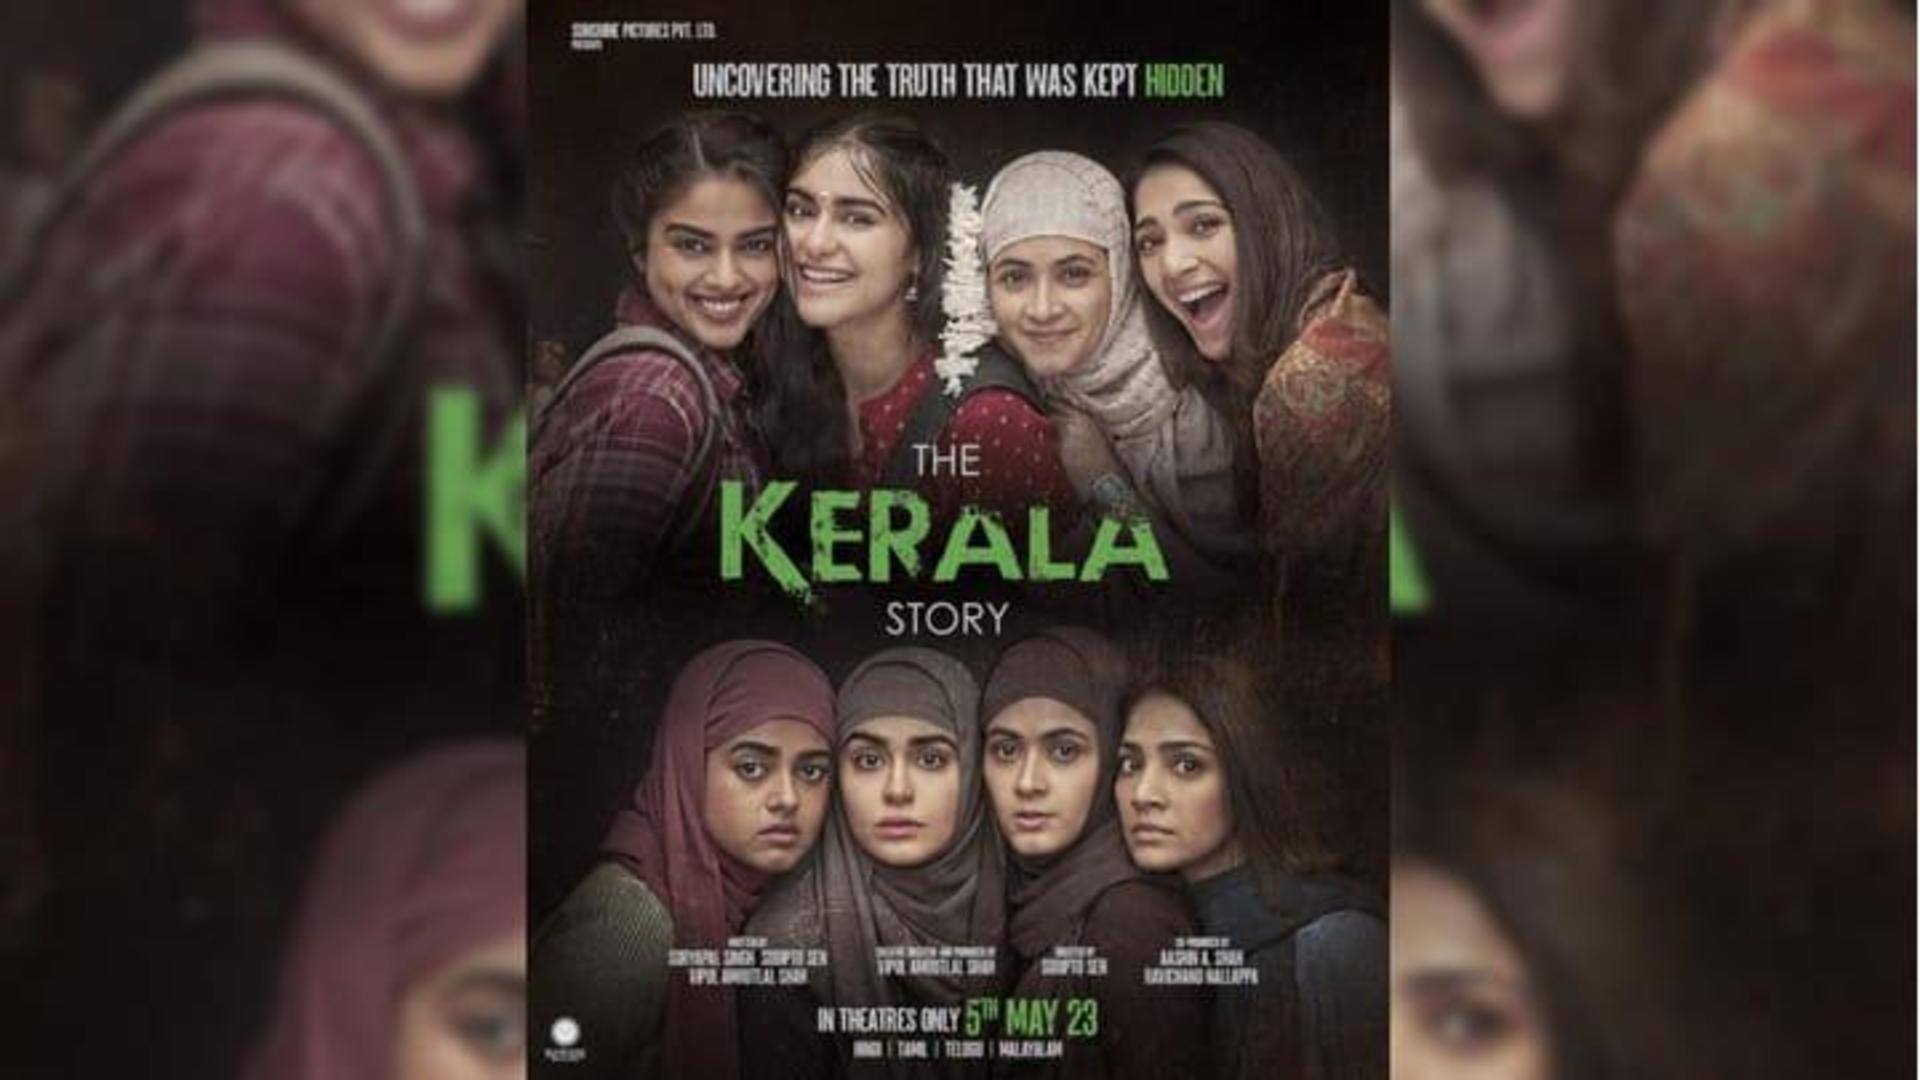 'The Kerala Story' not to be screened in Tamil Nadu